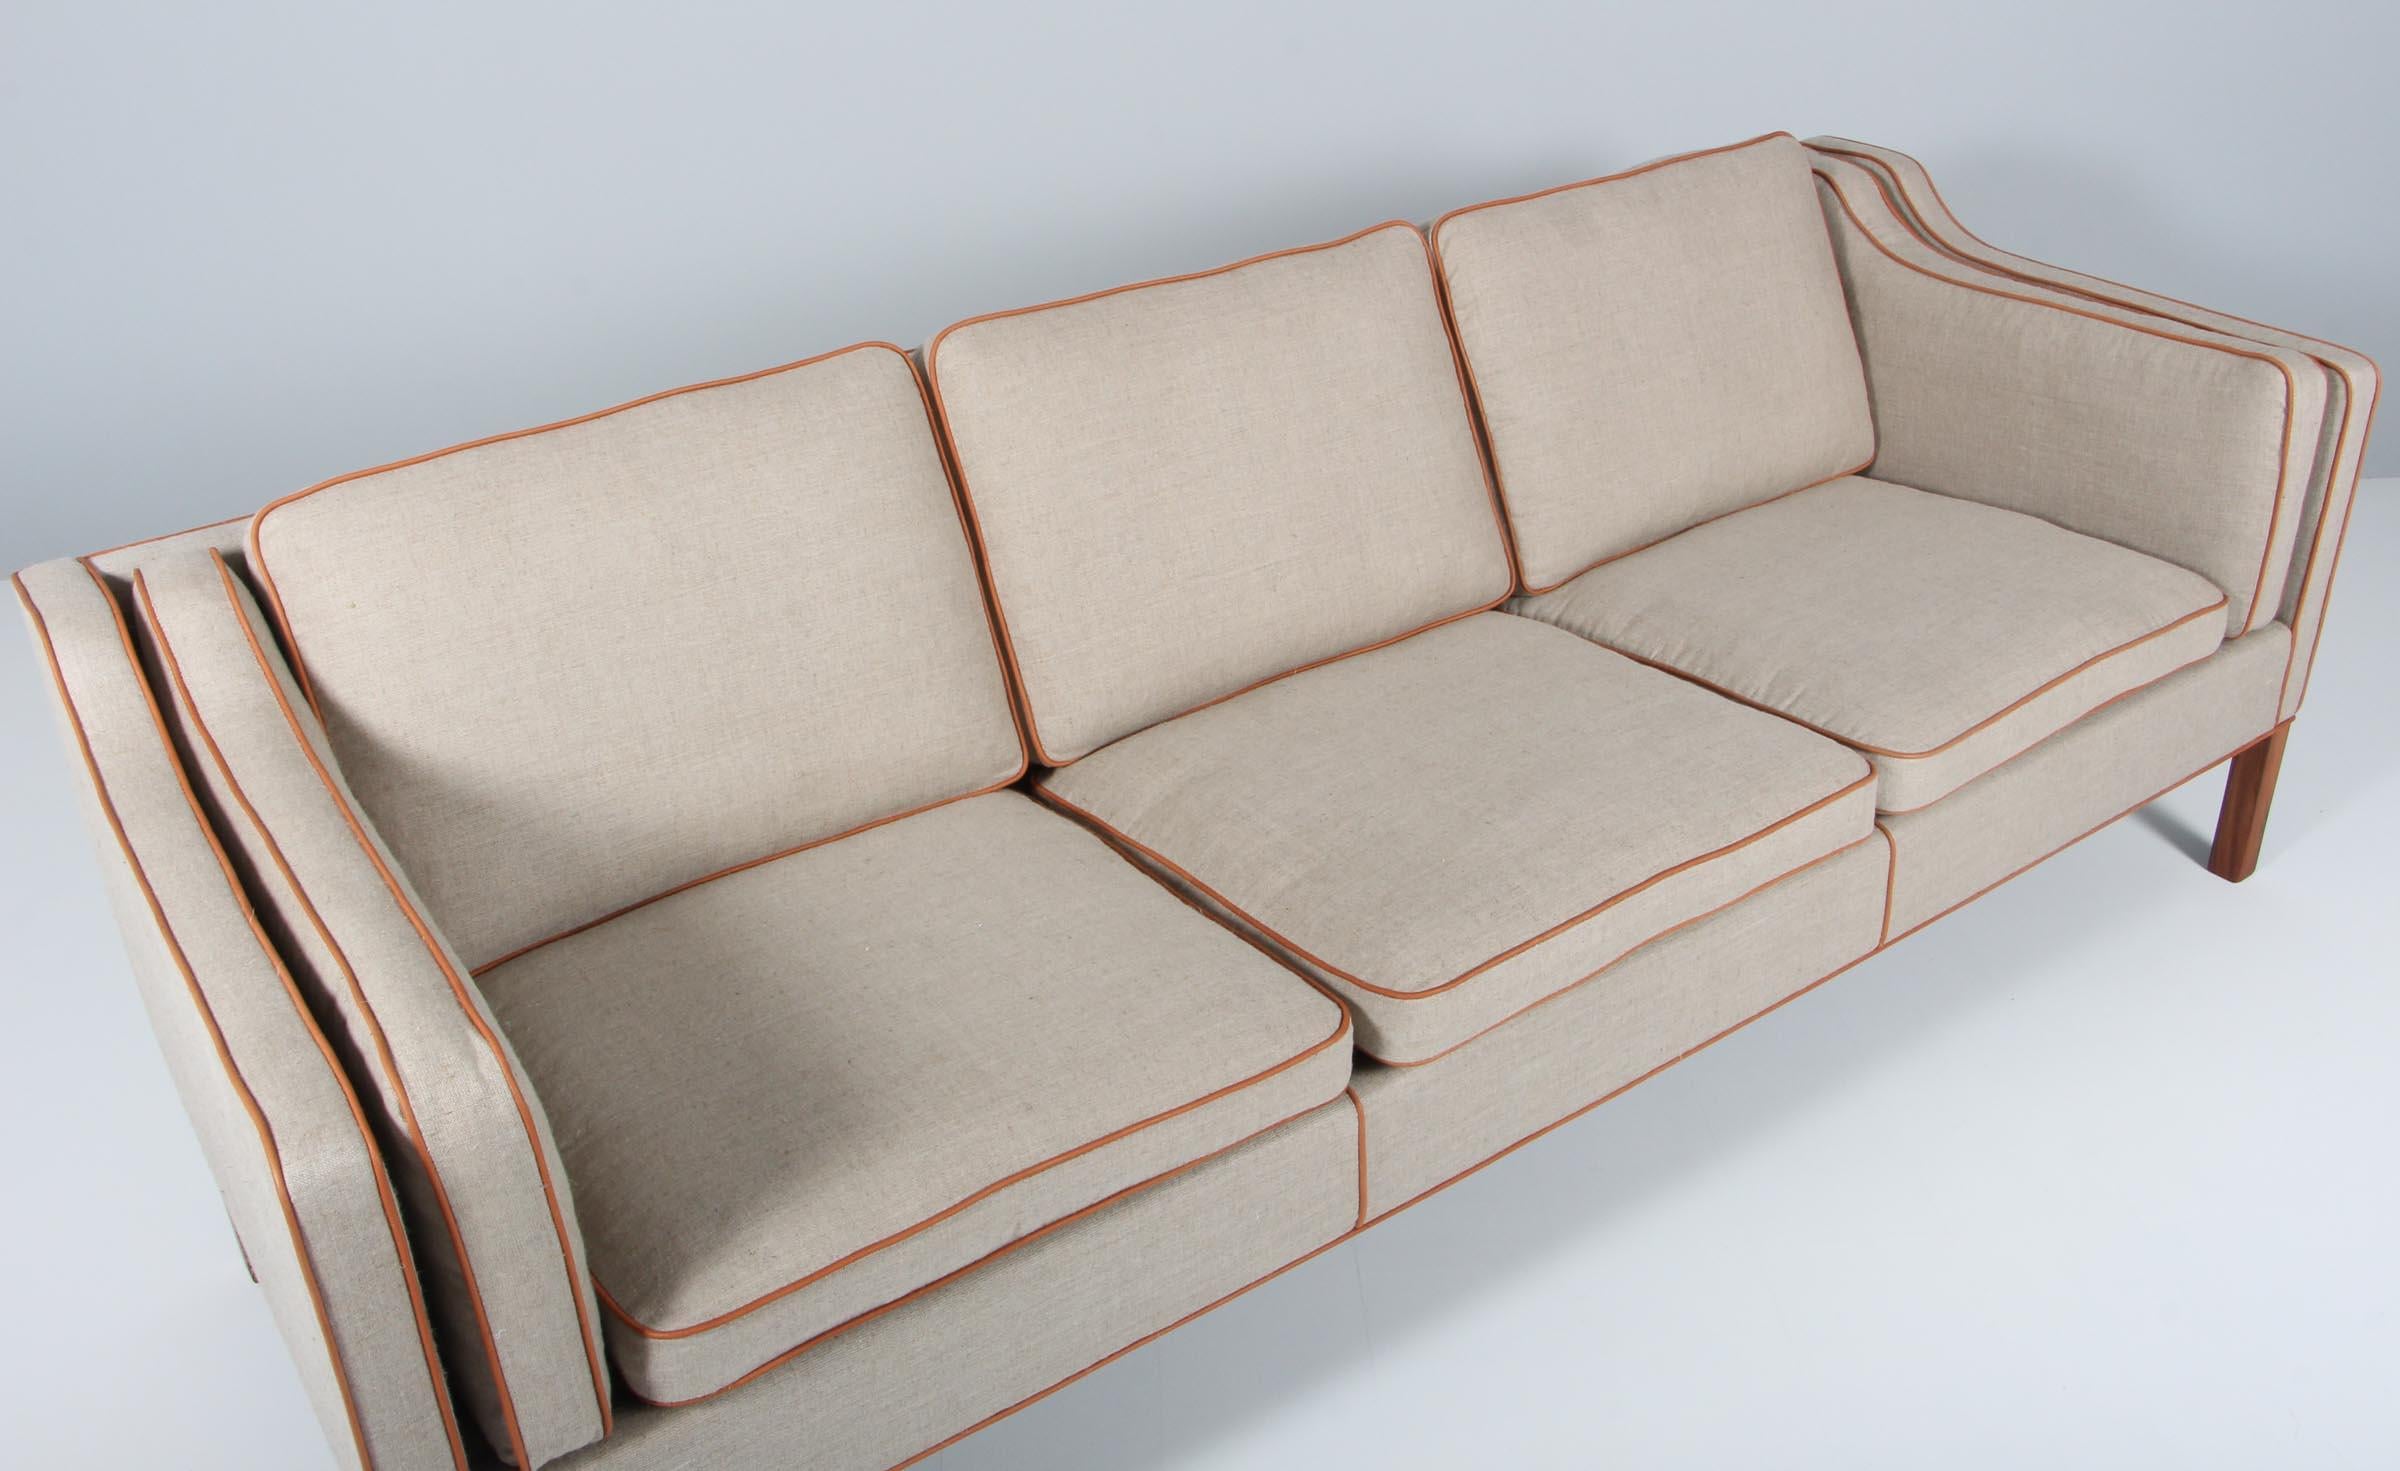 Børge Mogensen three-seat sofa new upholstered with cognac aniline leather and canvas.

Legs of teak.

Model 2213, made by Fredericia Furniture.